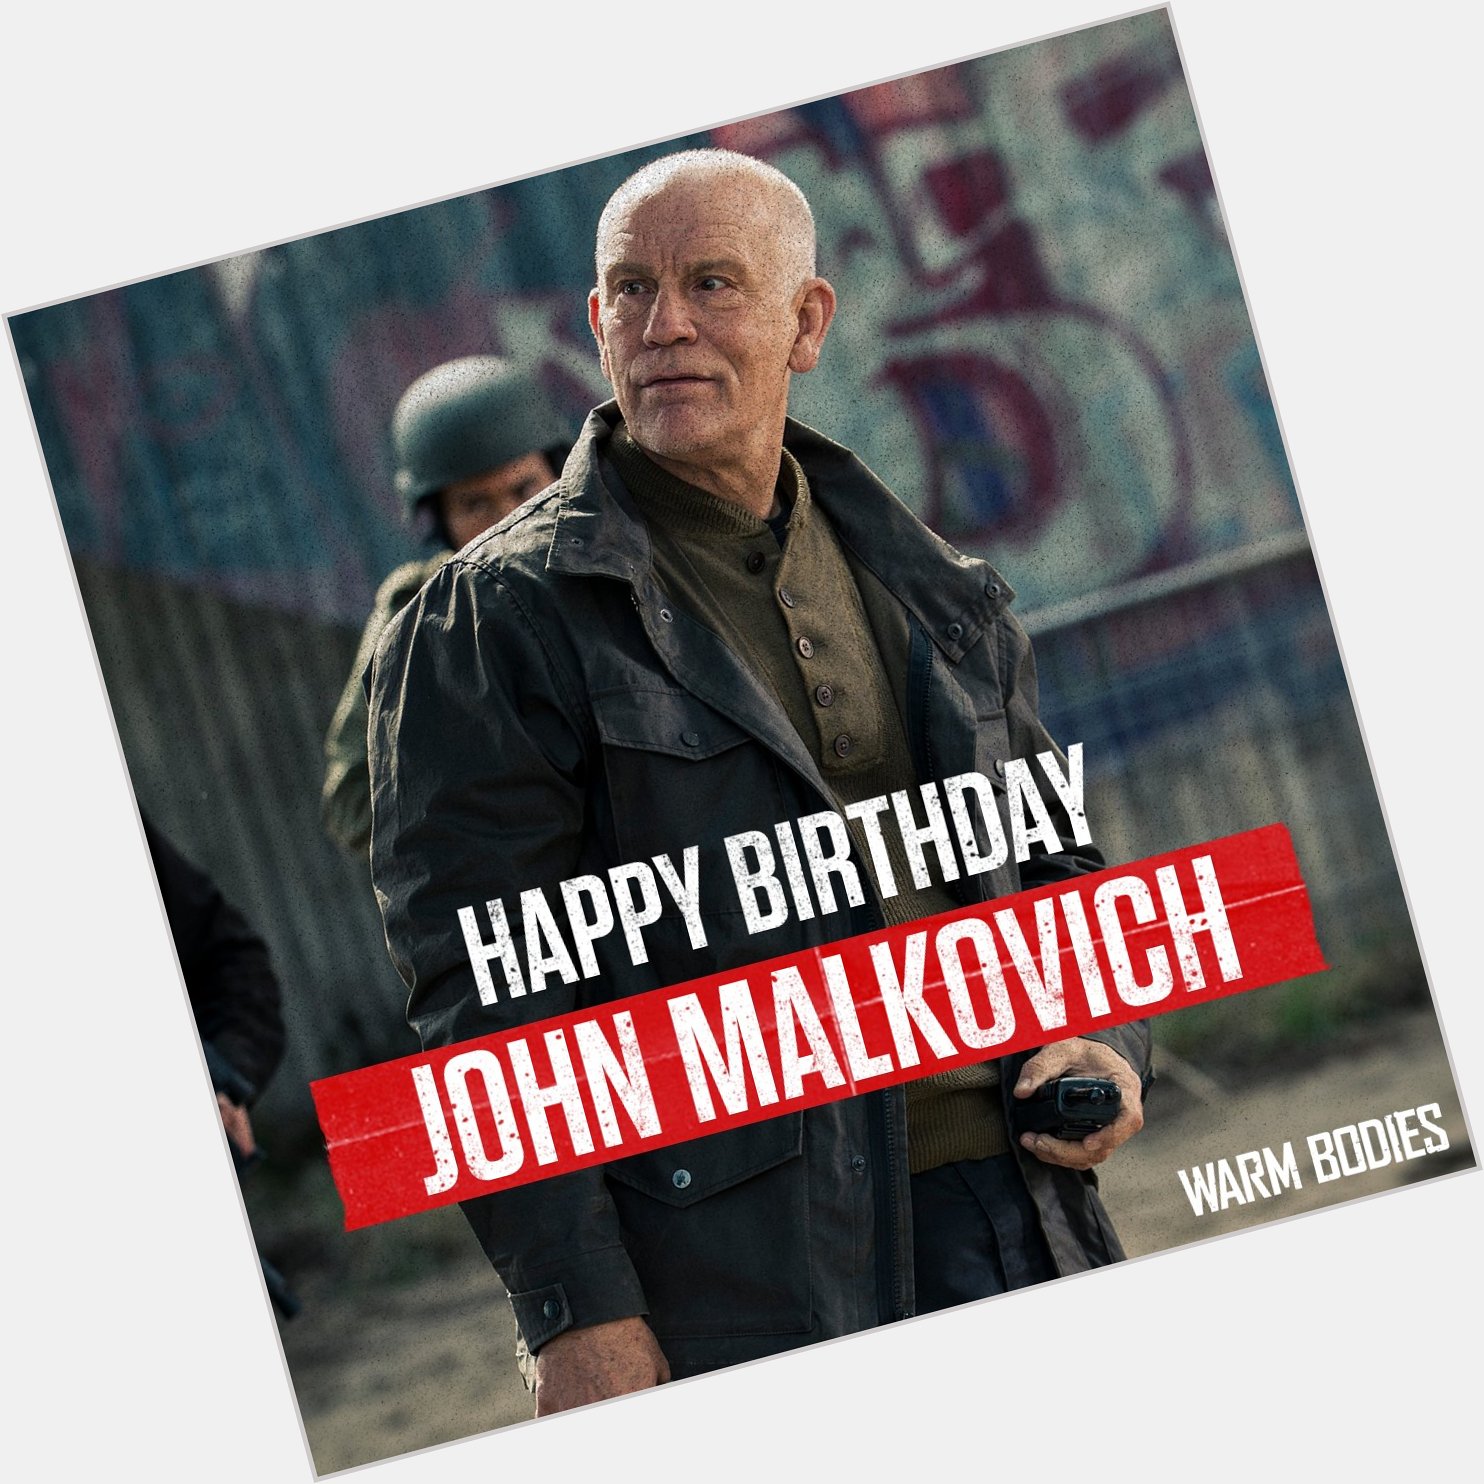 Happy birthday to our very own General Grigio, John Malkovich!  